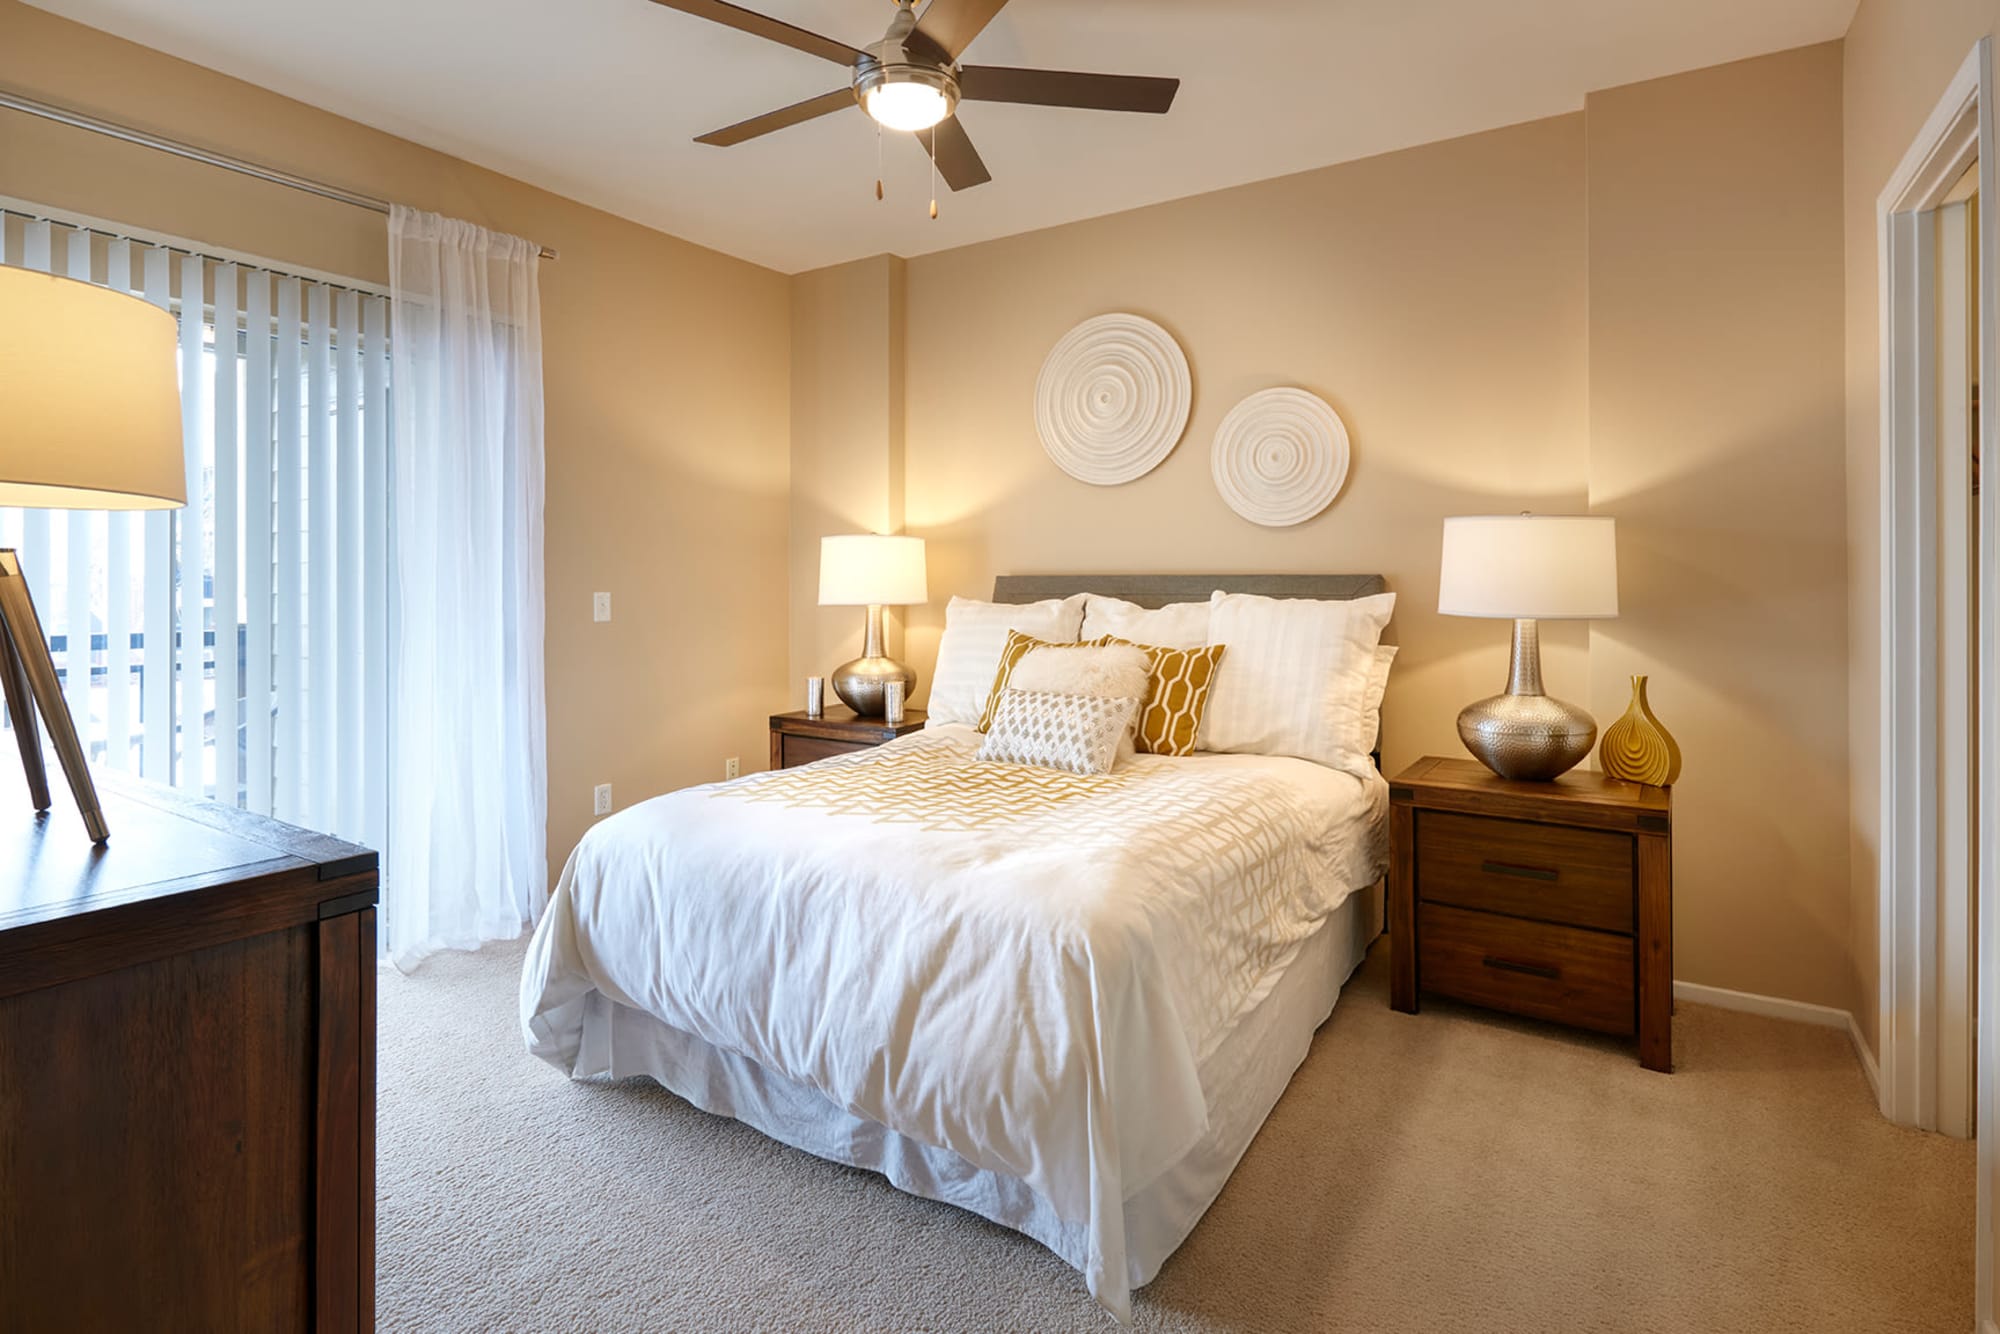 Master bedroom with a ceiling fan at Legend Oaks Apartments in Aurora, Colorado